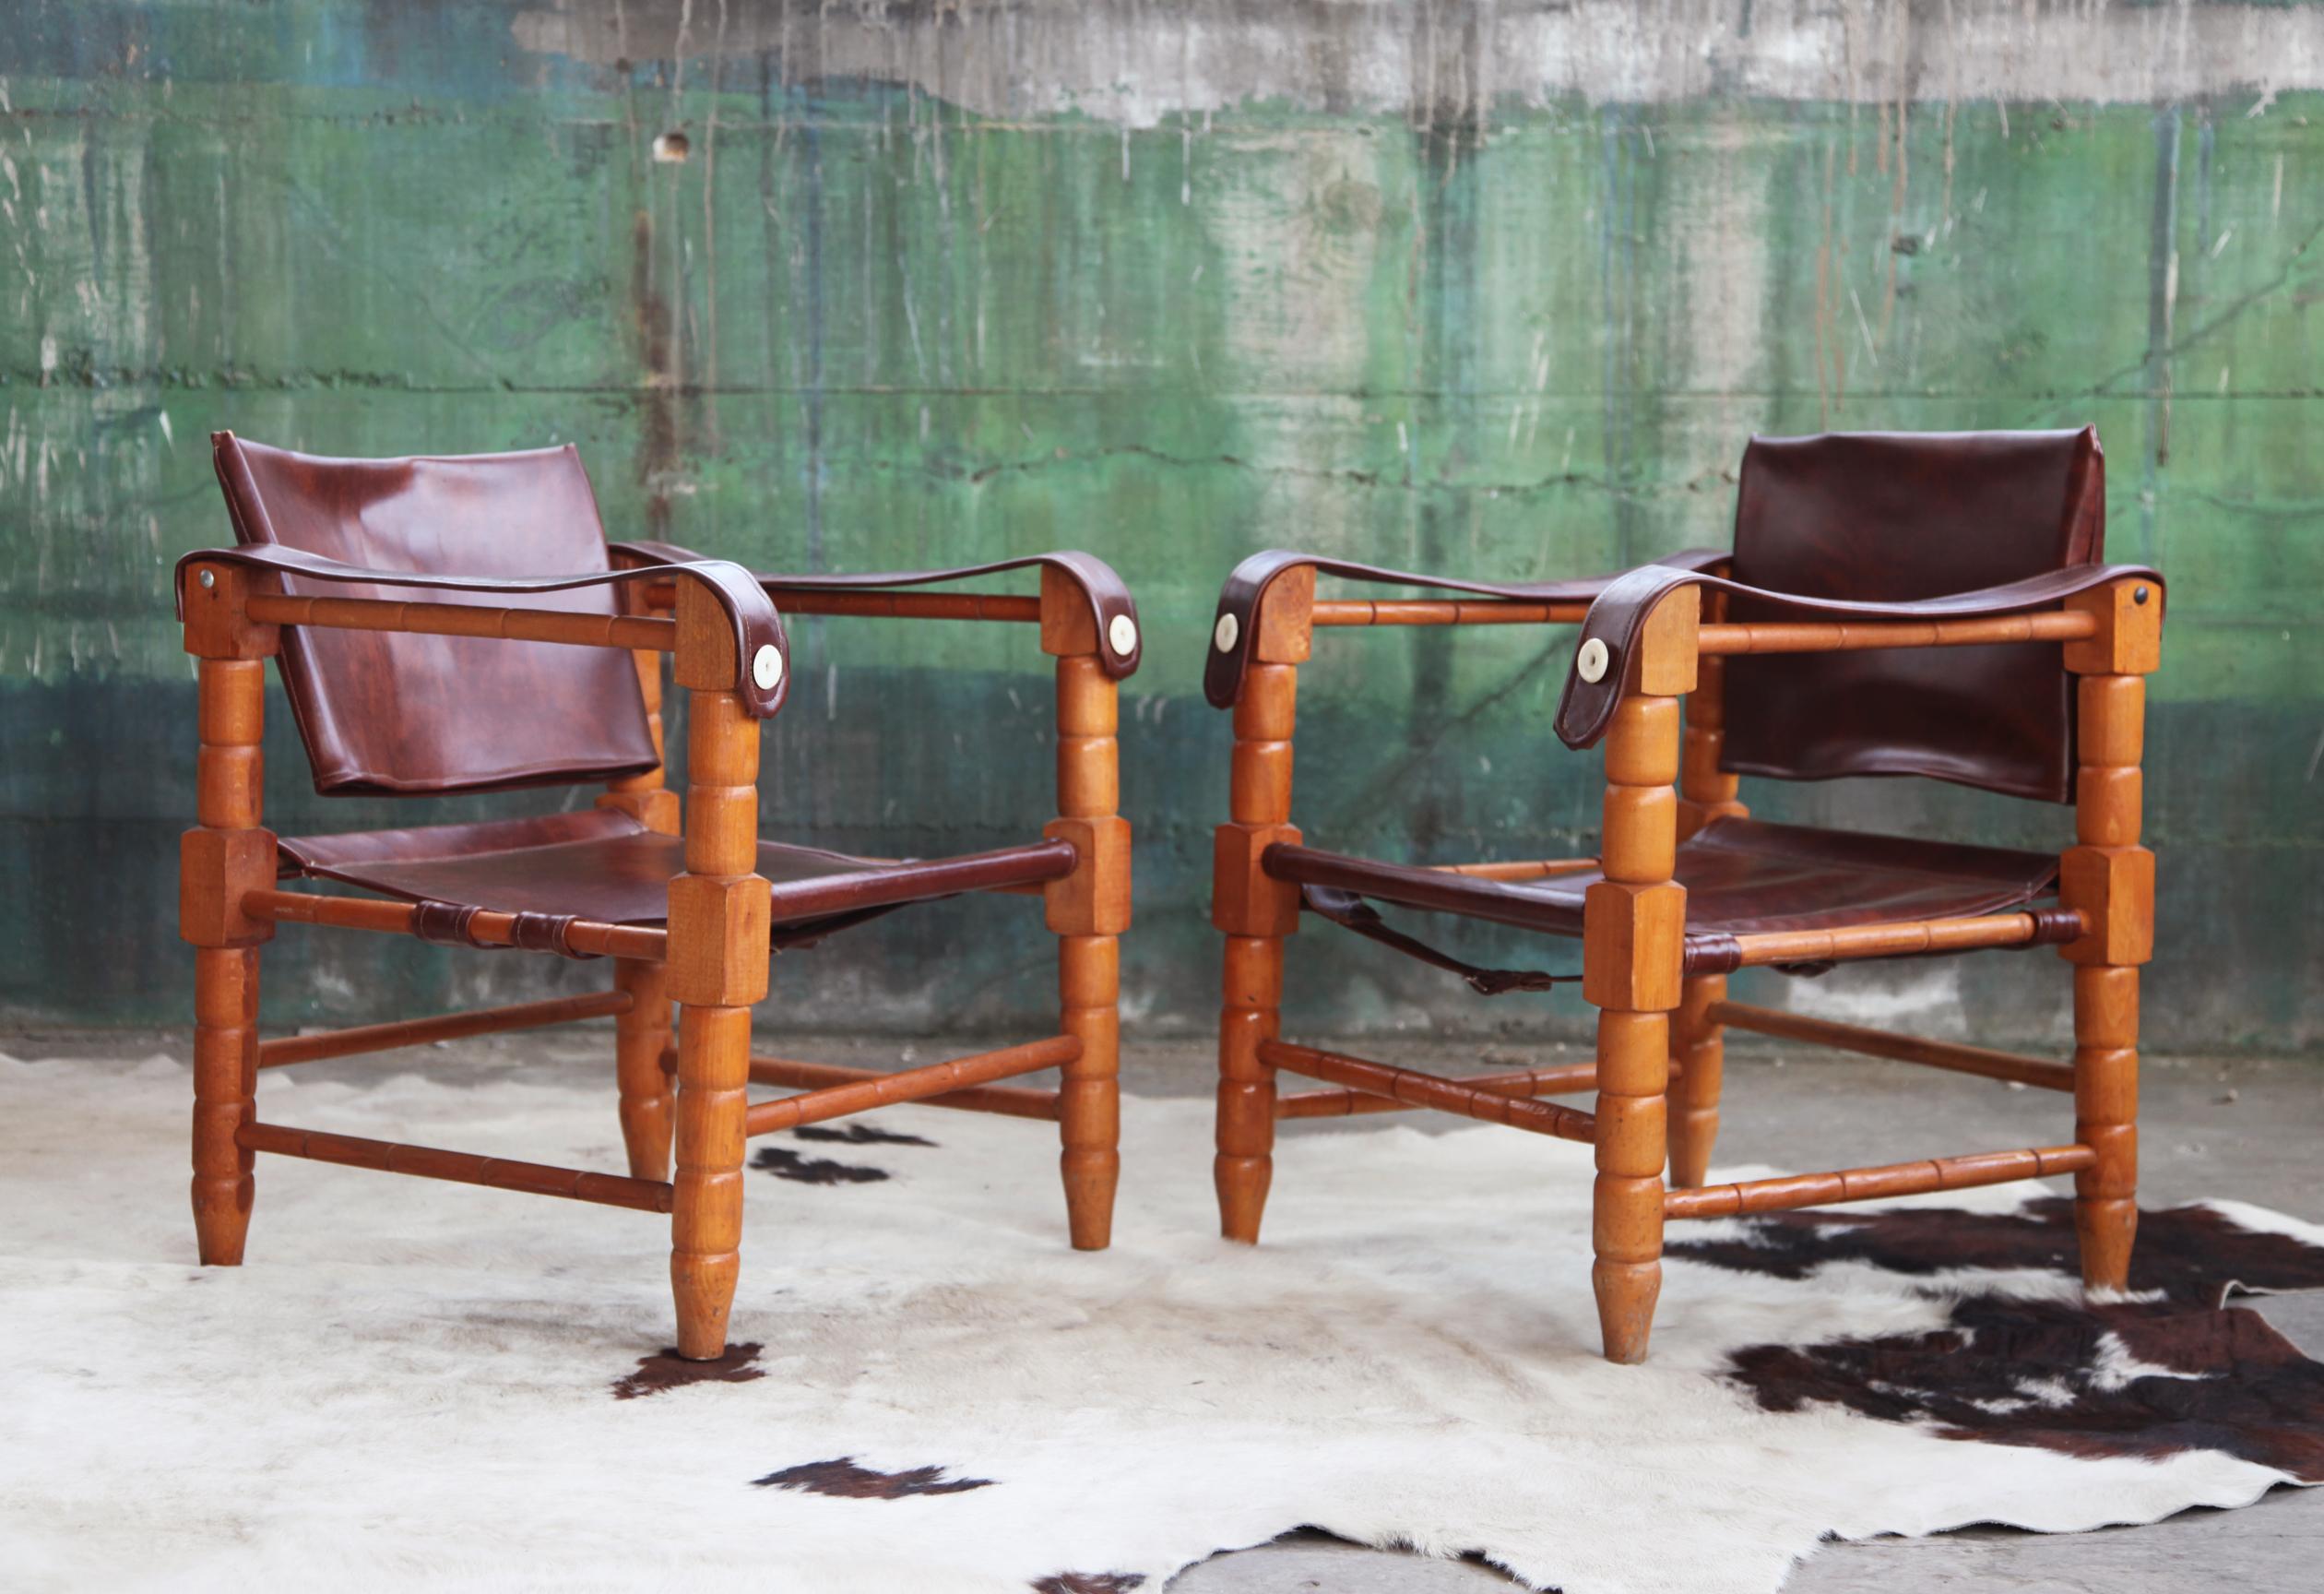 Sold here as a pair.

For sale here is a gorgeous pair of sculptural safari chairs imported from Africa in the 60's by our client who was an avid collector. These are hand carved versions of the safari chair modeled after the Scirocco Safari Chair